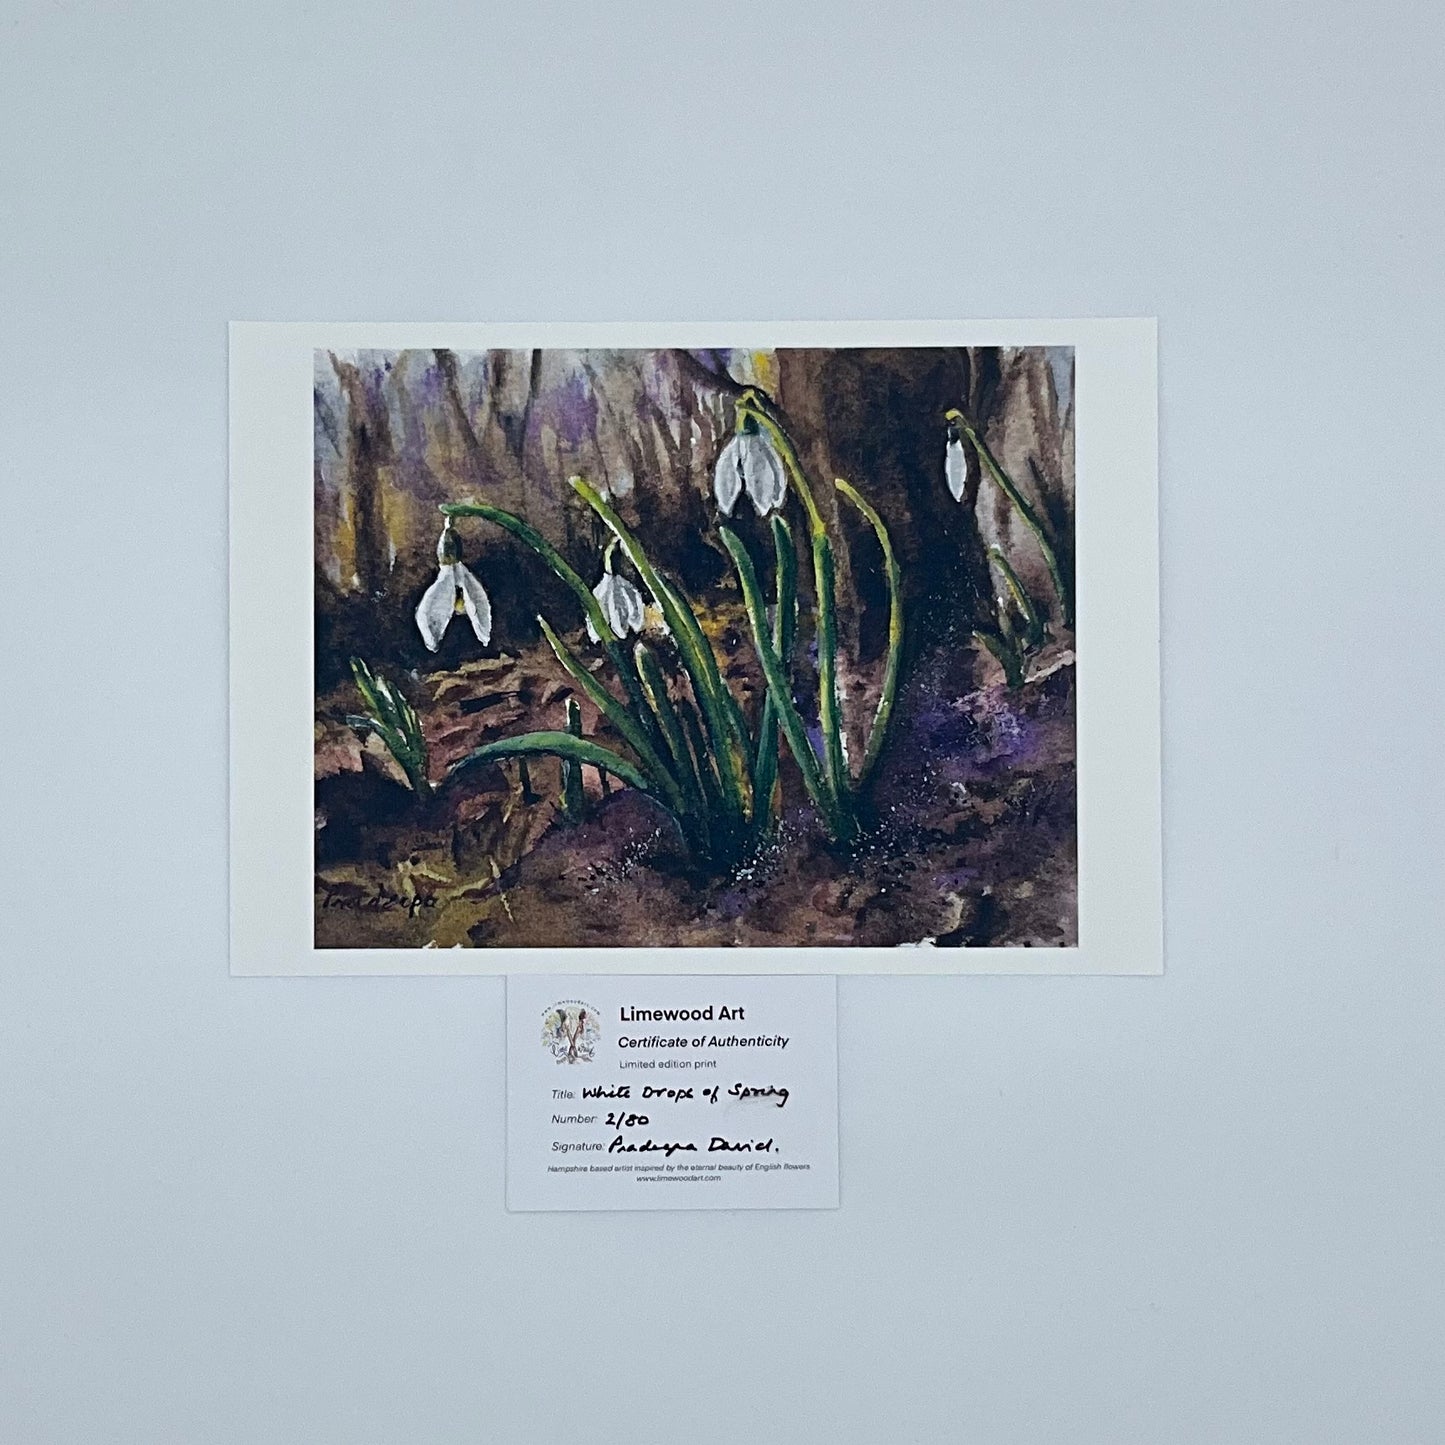 White Drops of Spring- 8x10 inch fine art print- signed & limited edition